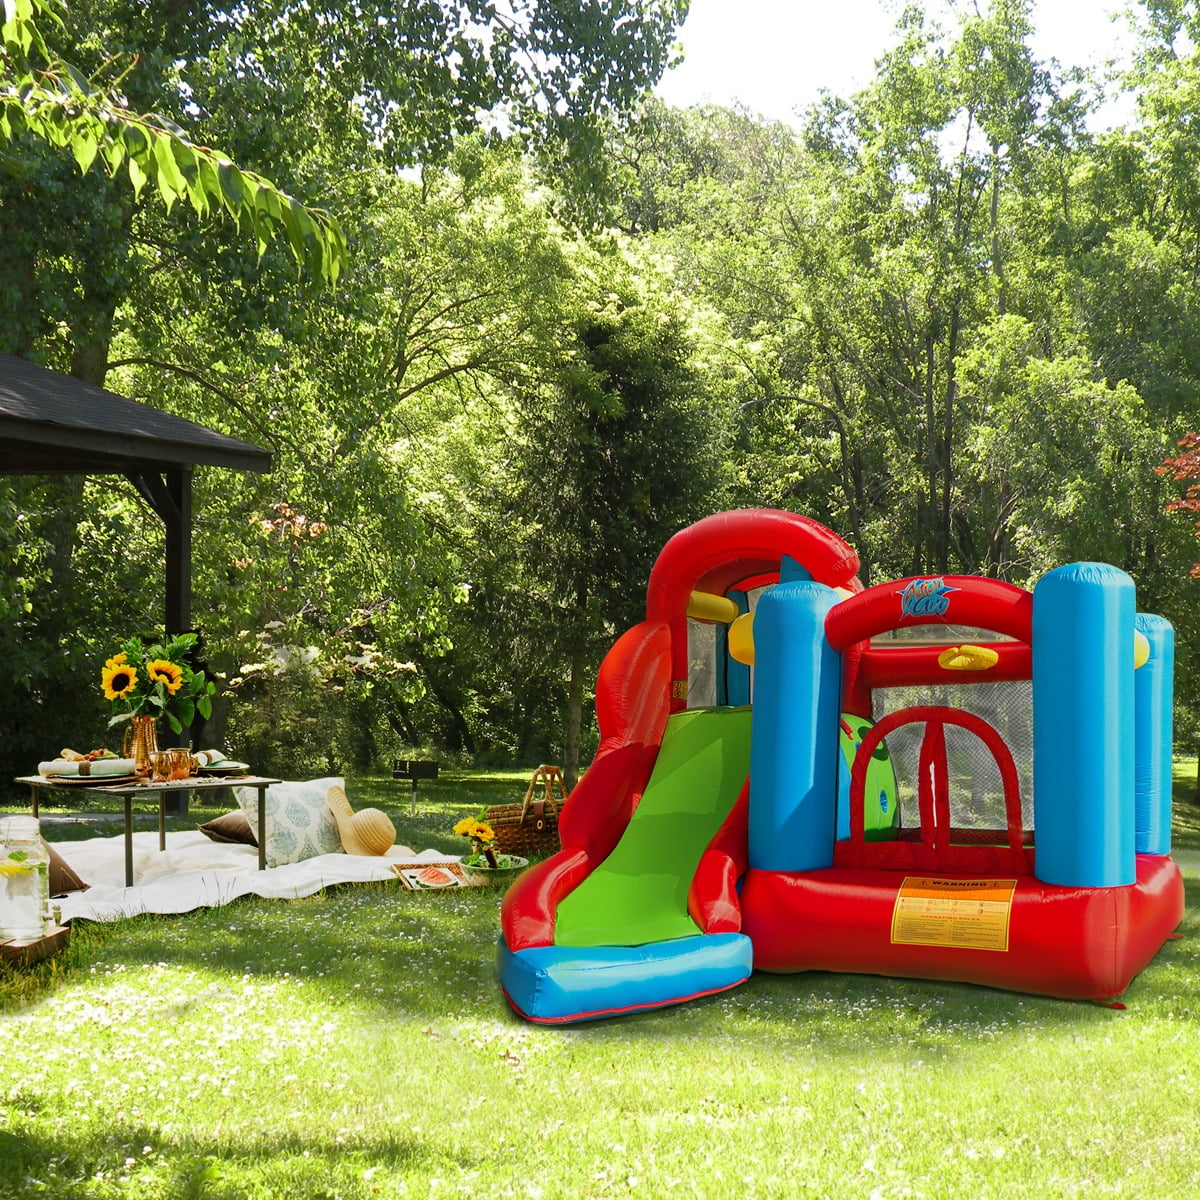 LLNN Inflatable Bounce House with Blower Play Houses for Outside Kids Party Theme Contribute to Physical and Mental Health Play Gifts Give Kids